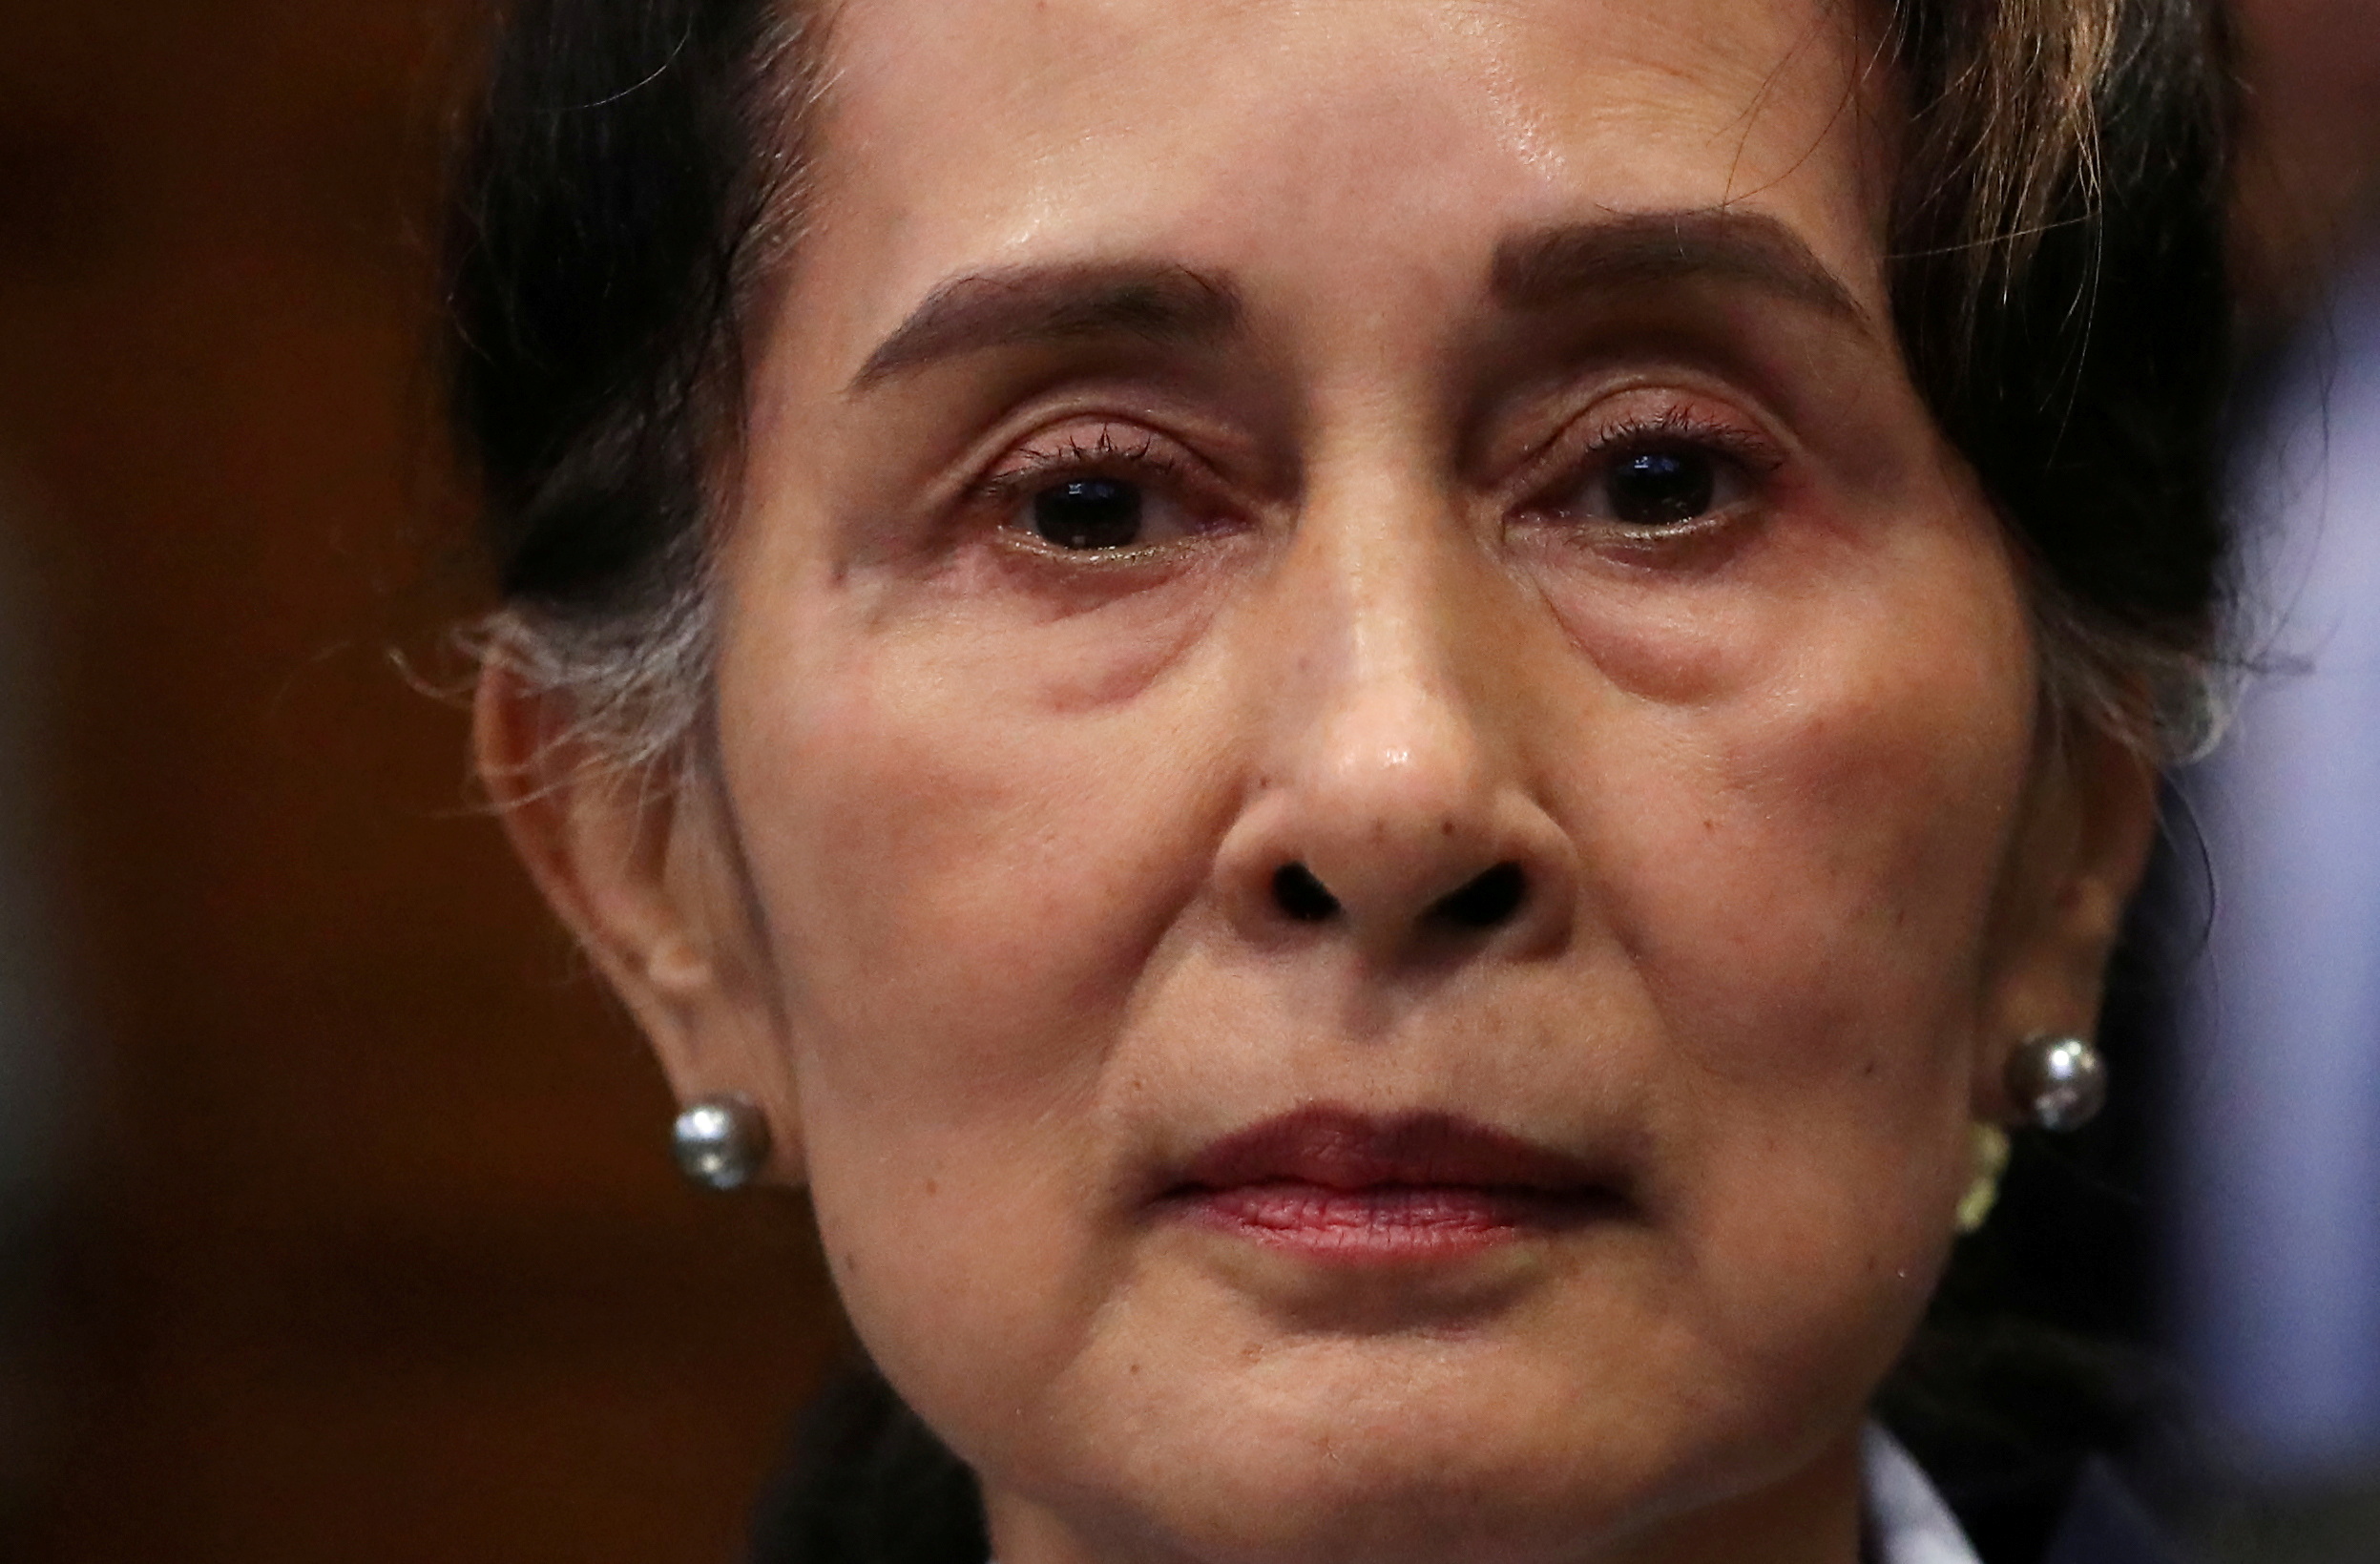 Myanmar's leader Aung San Suu Kyi attends a hearing on the second day of hearings in a case filed by Gambia against Myanmar alleging genocide against the minority Muslim Rohingya population, at the International Court of Justice (ICJ) in The Hague, Netherlands December 11, 2019.  REUTERS/Yves Herman